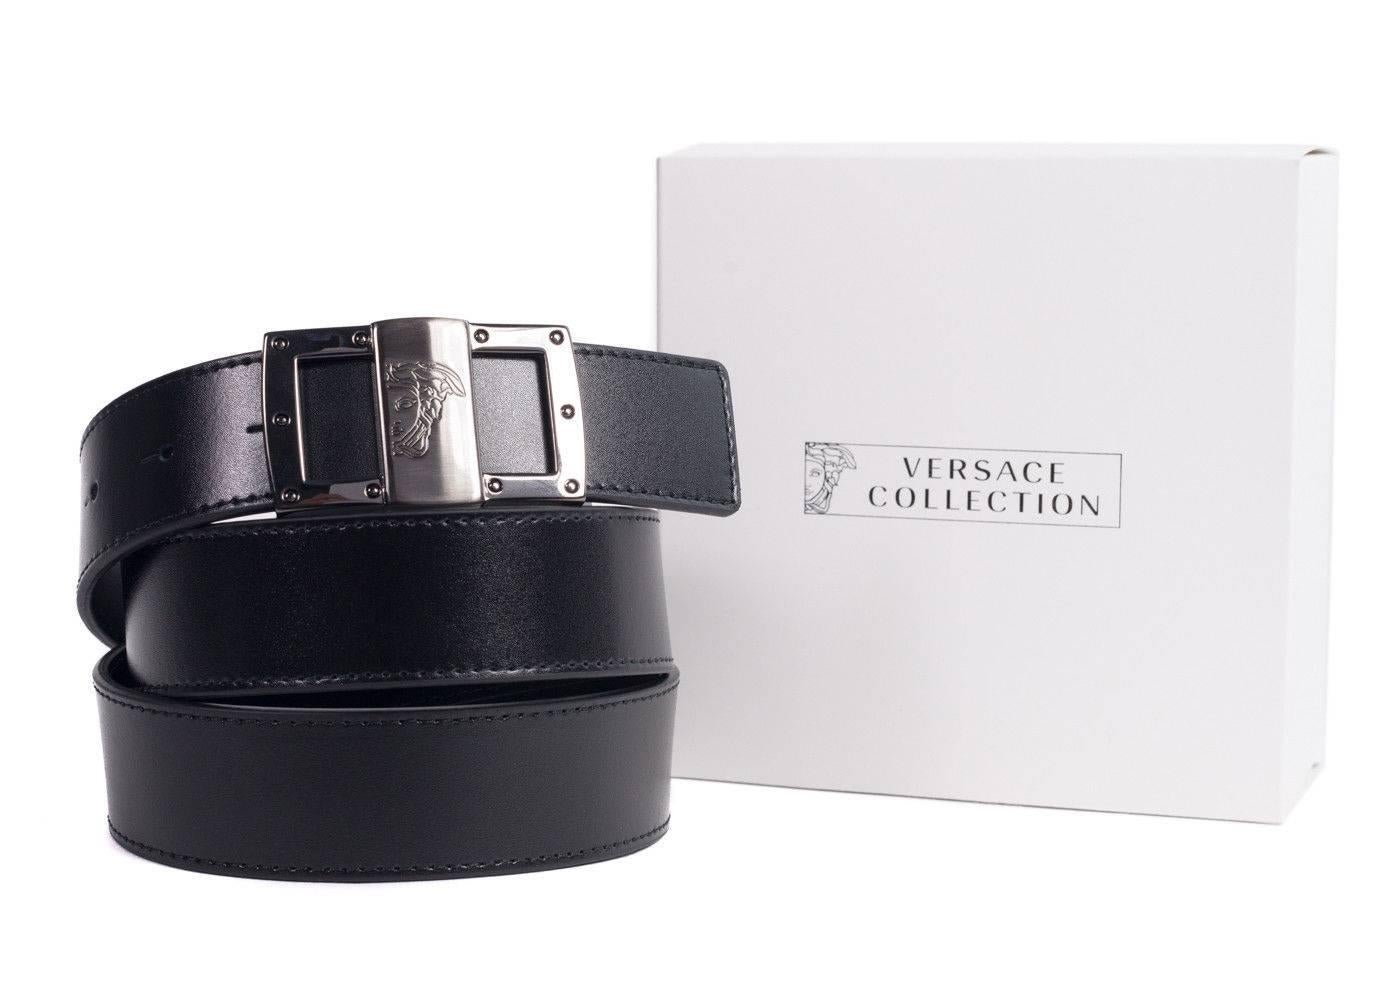 Brand New Versace Collection Belt
Original Tags
Retails in Stores & Online for $450
One Size Fits All


Versace Collection's black leather belt made with 100% calfskin leather featuring a silver plated logo with a half medusa head. Perfect to pair